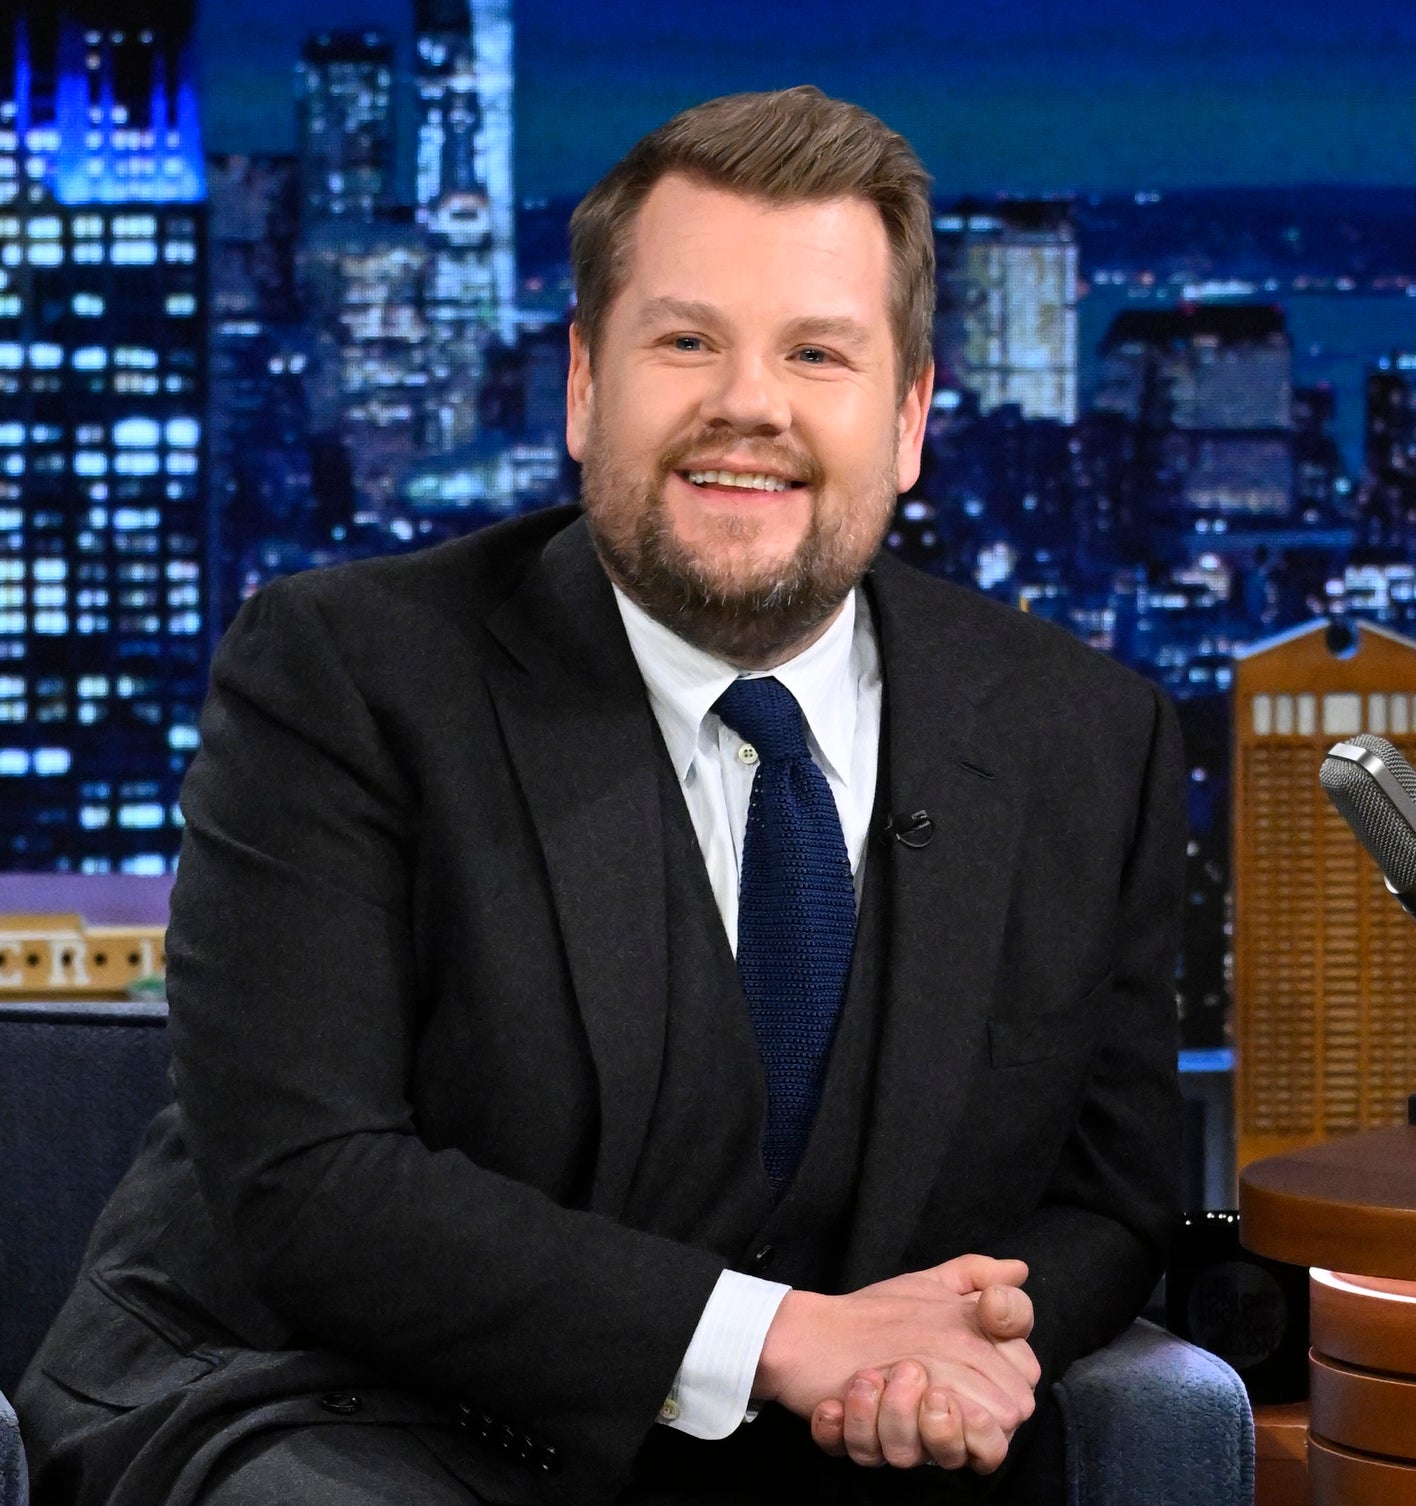 James Corden sitting on a chair in a suit and tie, on a talk show set with cityscape backdrop